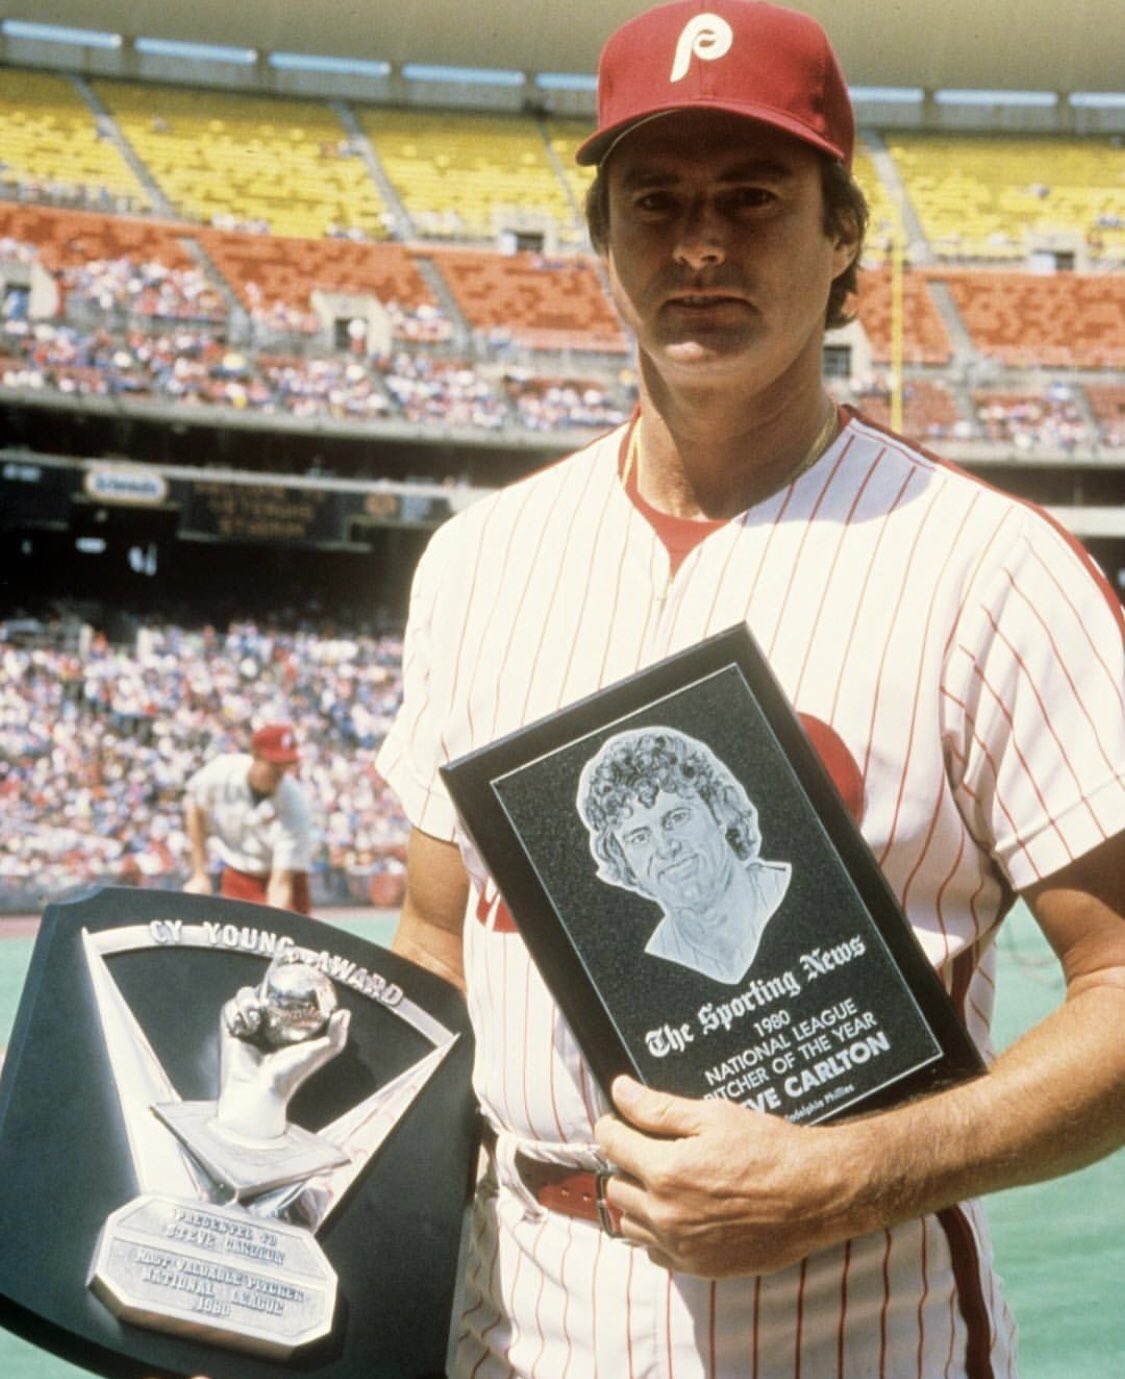 Happy birthday to Steve Carlton, the greatest pitcher I never got to watch live. 